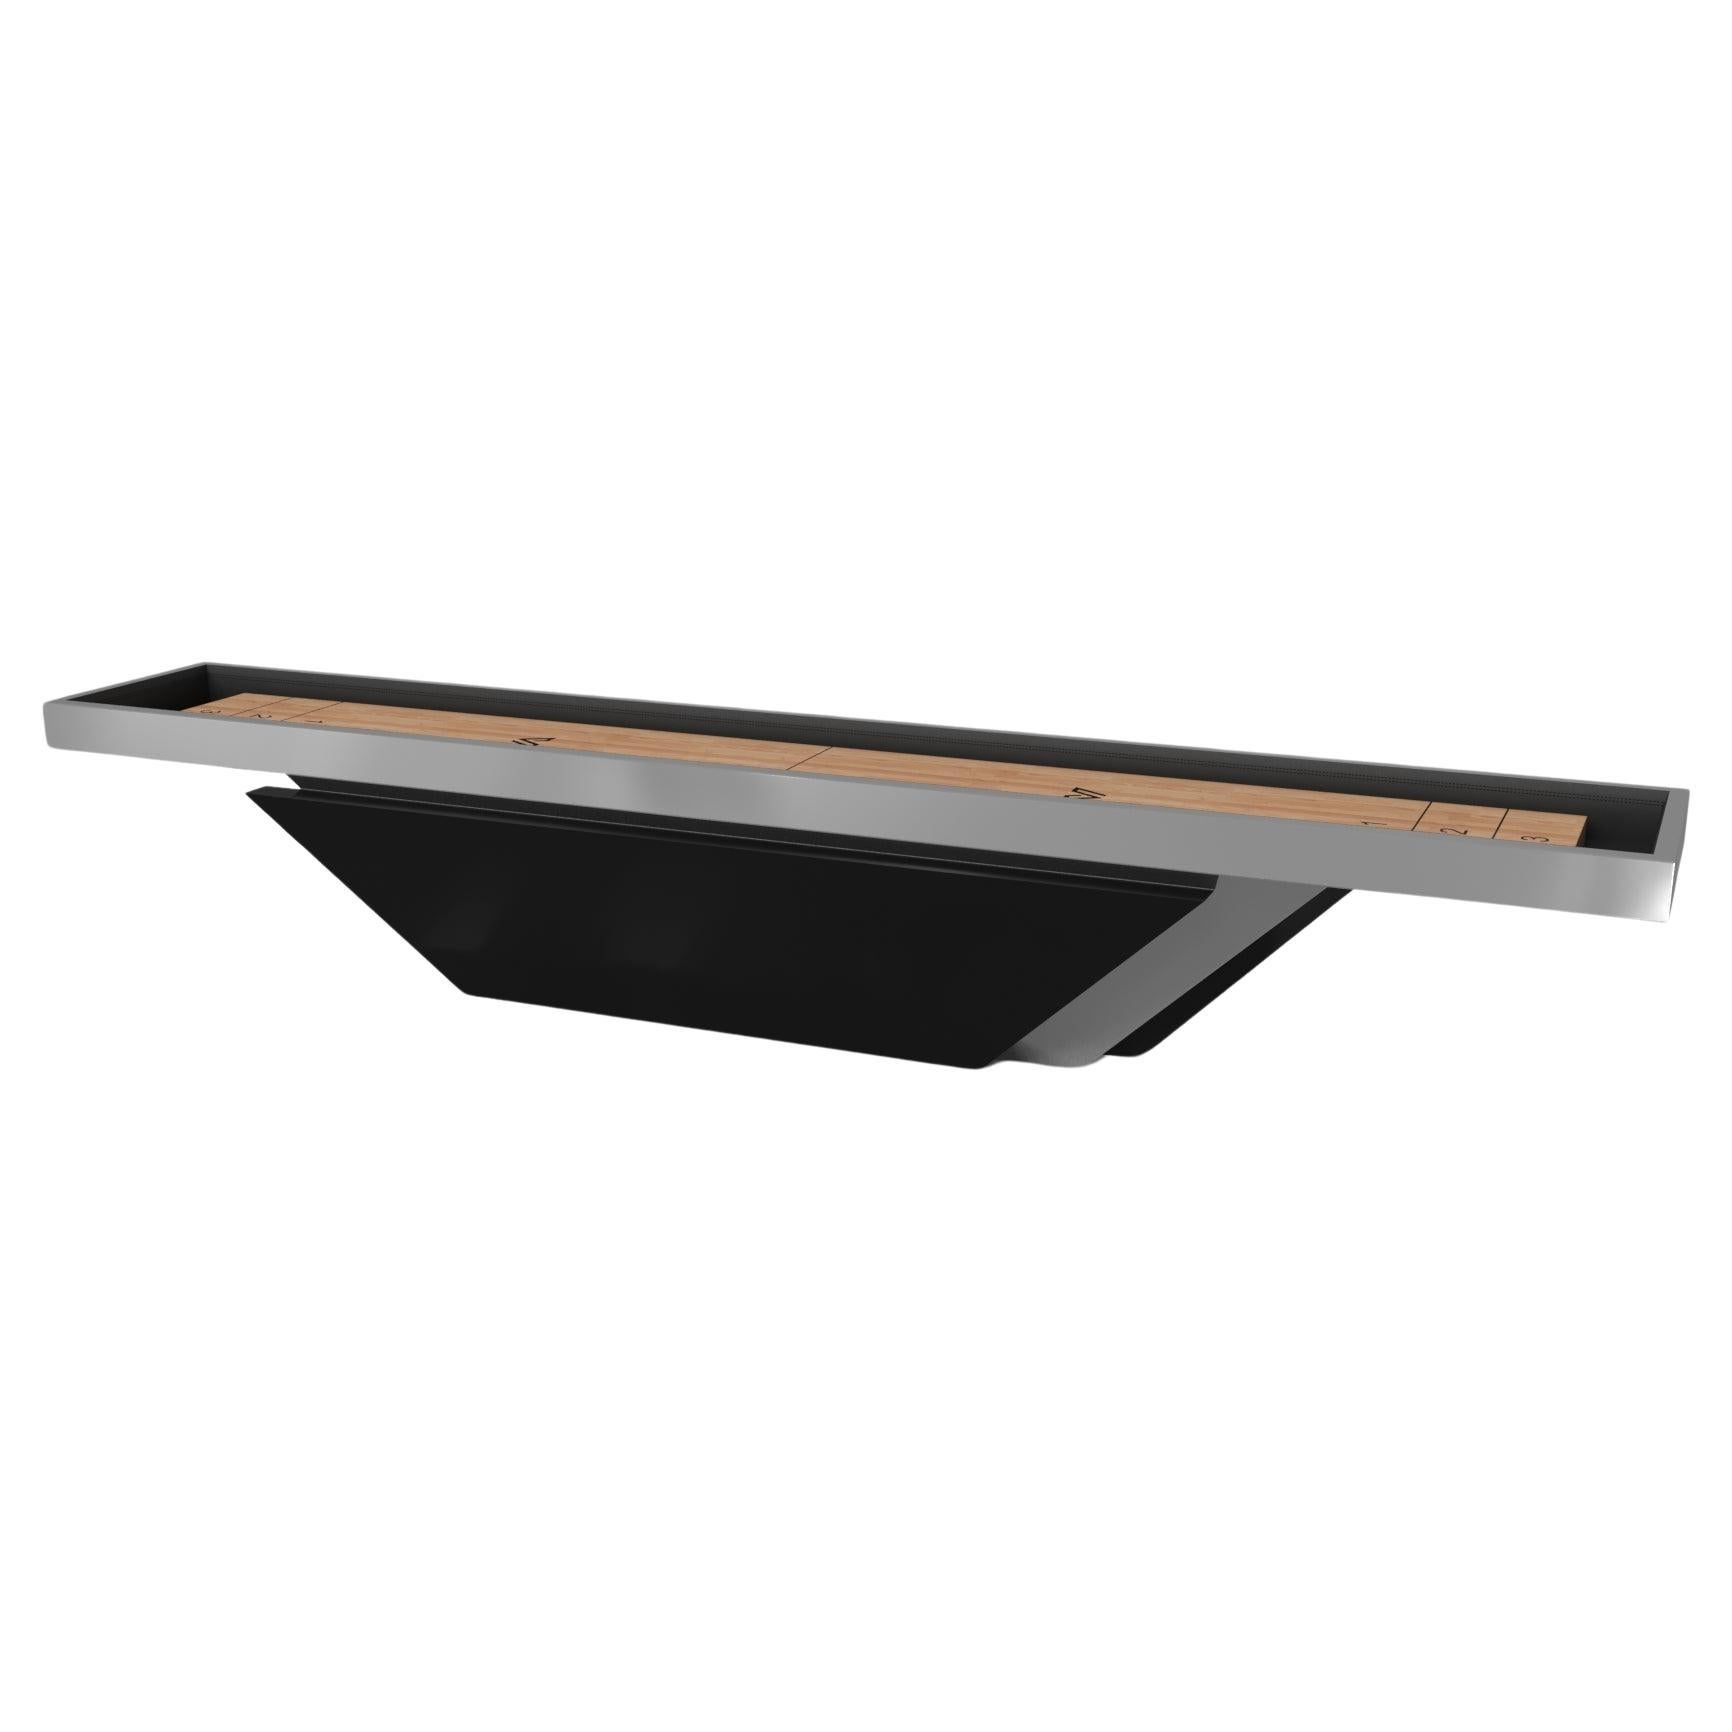 Elevate Customs Vogue Shuffleboard Tables/Stainless Steel Sheet Metal in 18'-USA